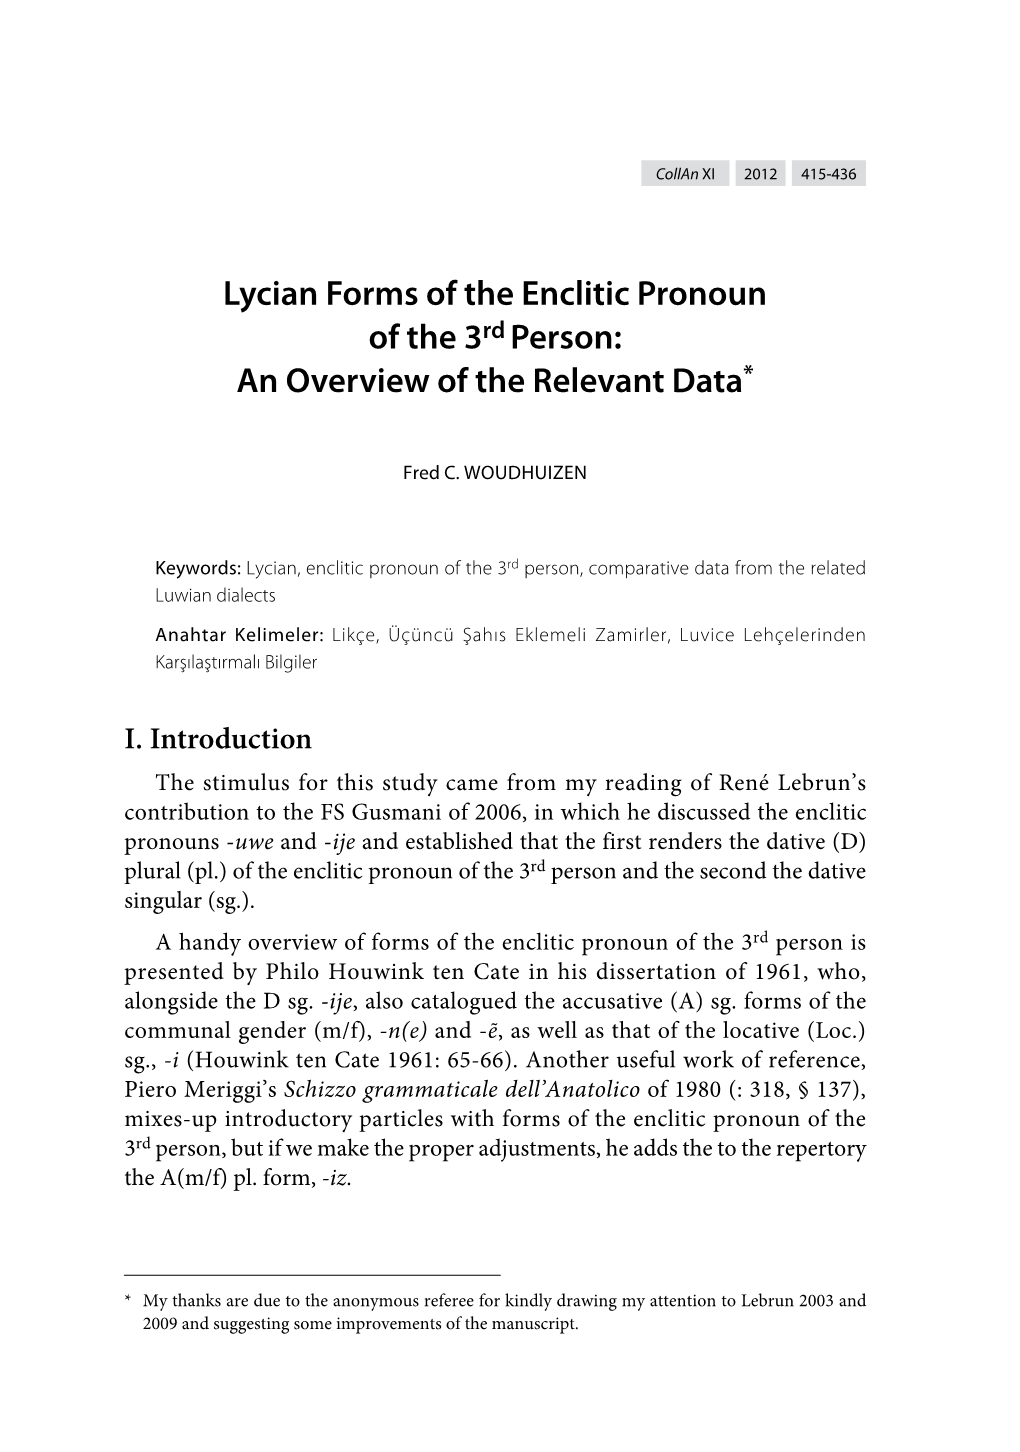 Lycian Forms of the Enclitic Pronoun of the 3Rd Person: an Overview of the Relevant Data*